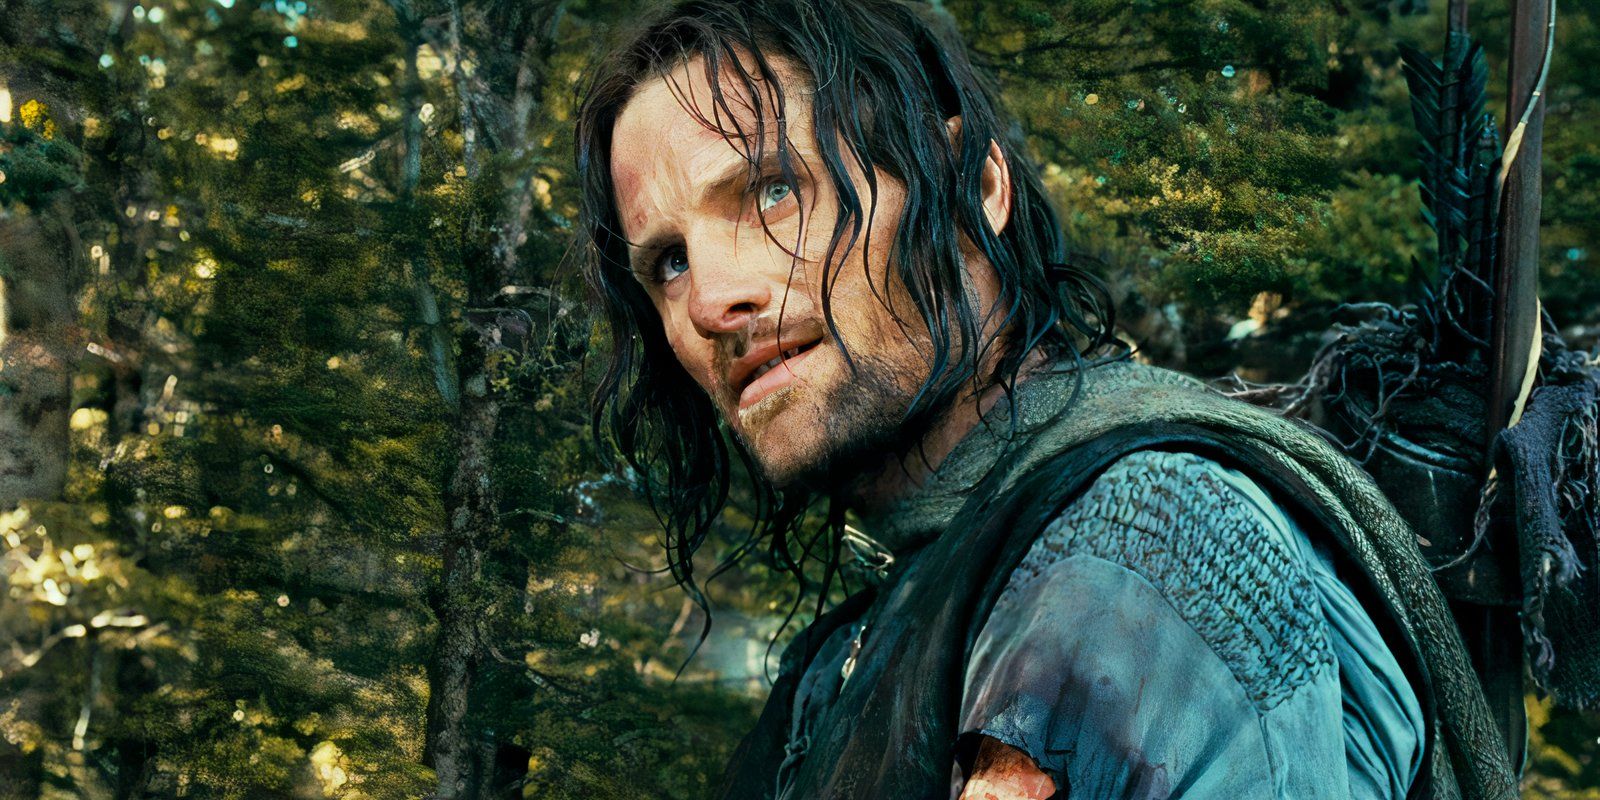 Lord Of The Rings Aragorn Actor Addresses Potential Return For 2026 Hunt For Gollum Movie